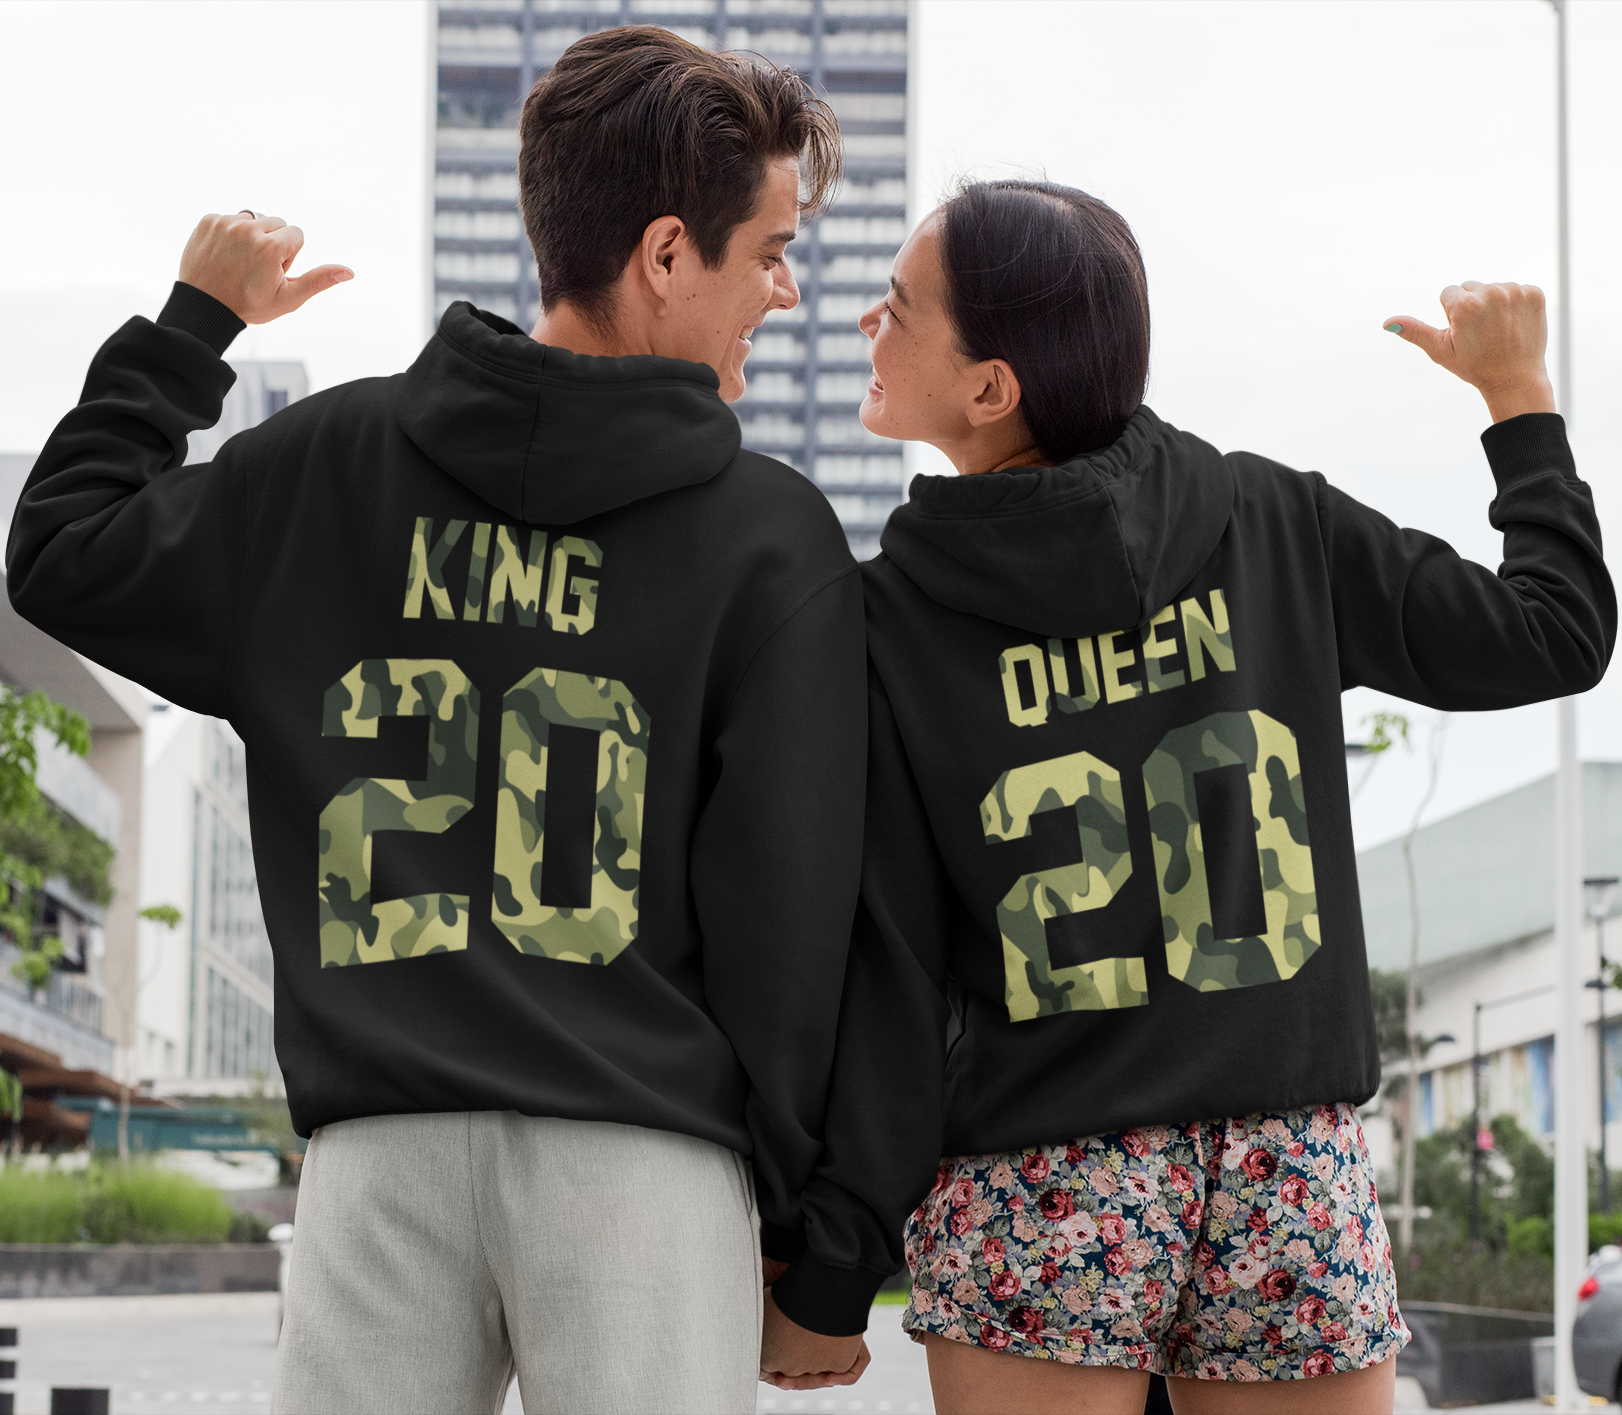 https://cvlr.de/wp-content/uploads/2020/03/2_mockup-of-a-romantic-couple-wearing-pullover-hoodies-30088-e1585056417387.png